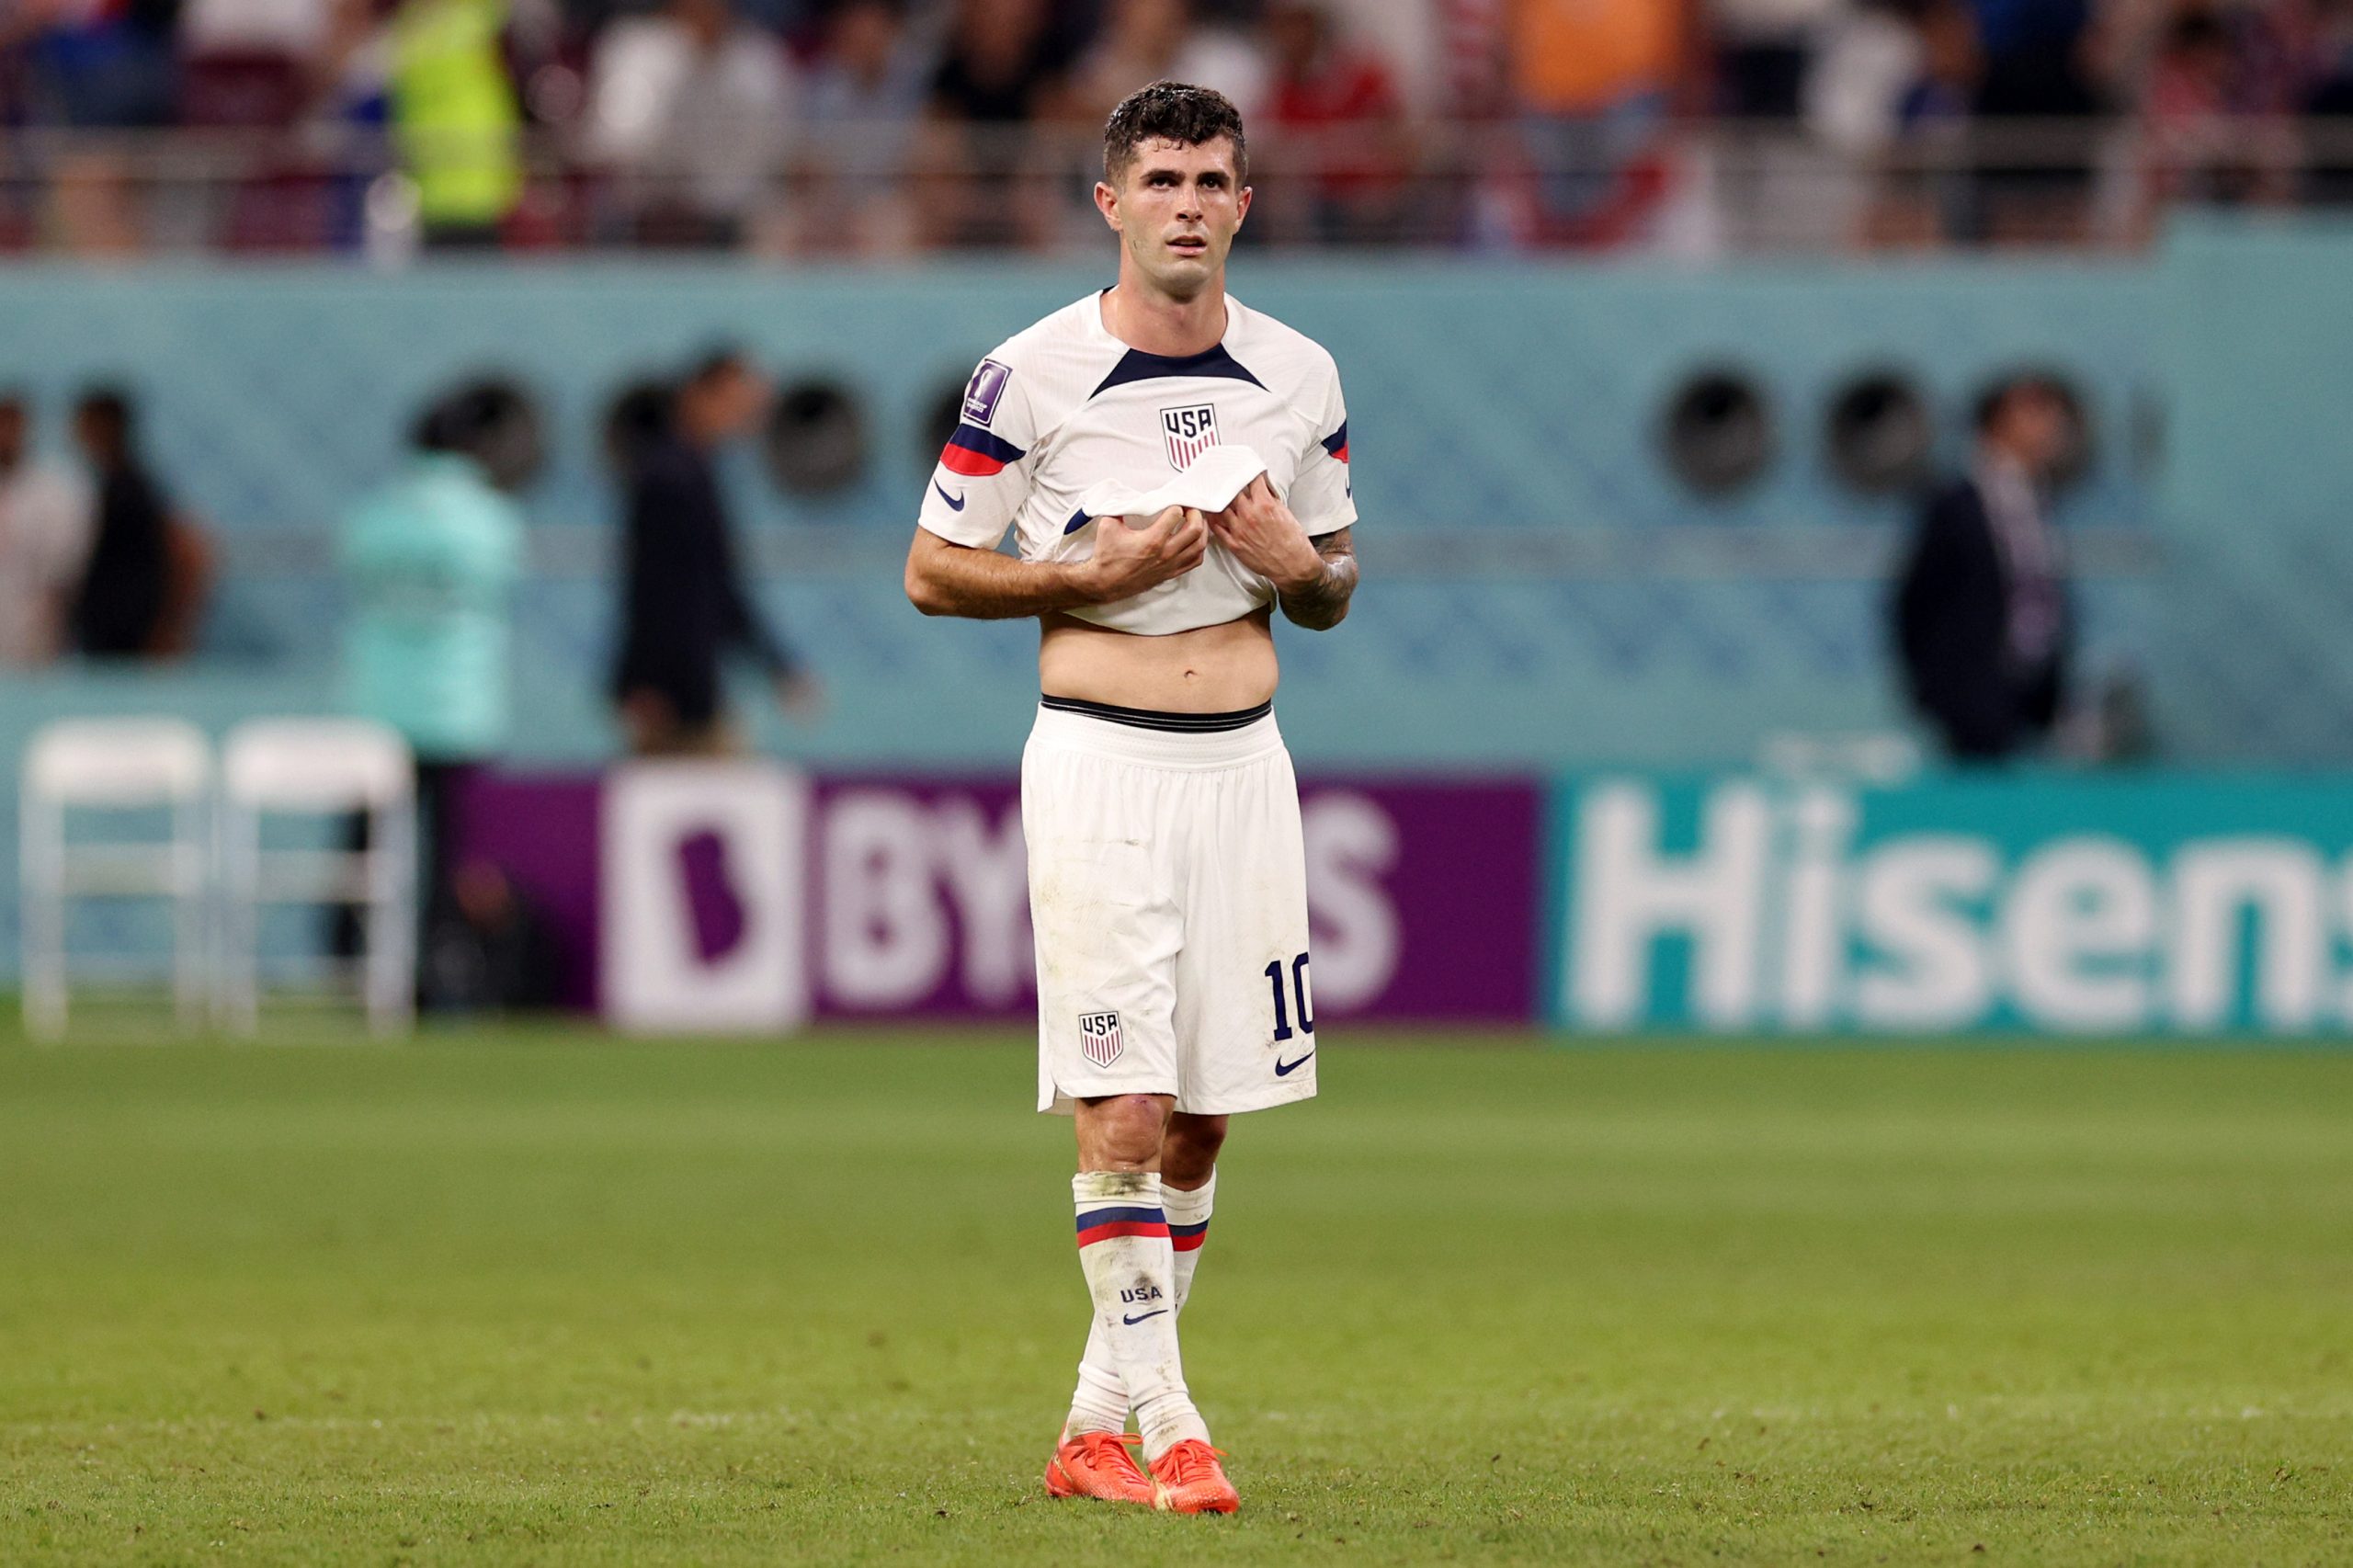 USMNT interim head coach Anthony Hudson calls up Chelsea star Christian Pulisic for CONCACAF Nations League matches..